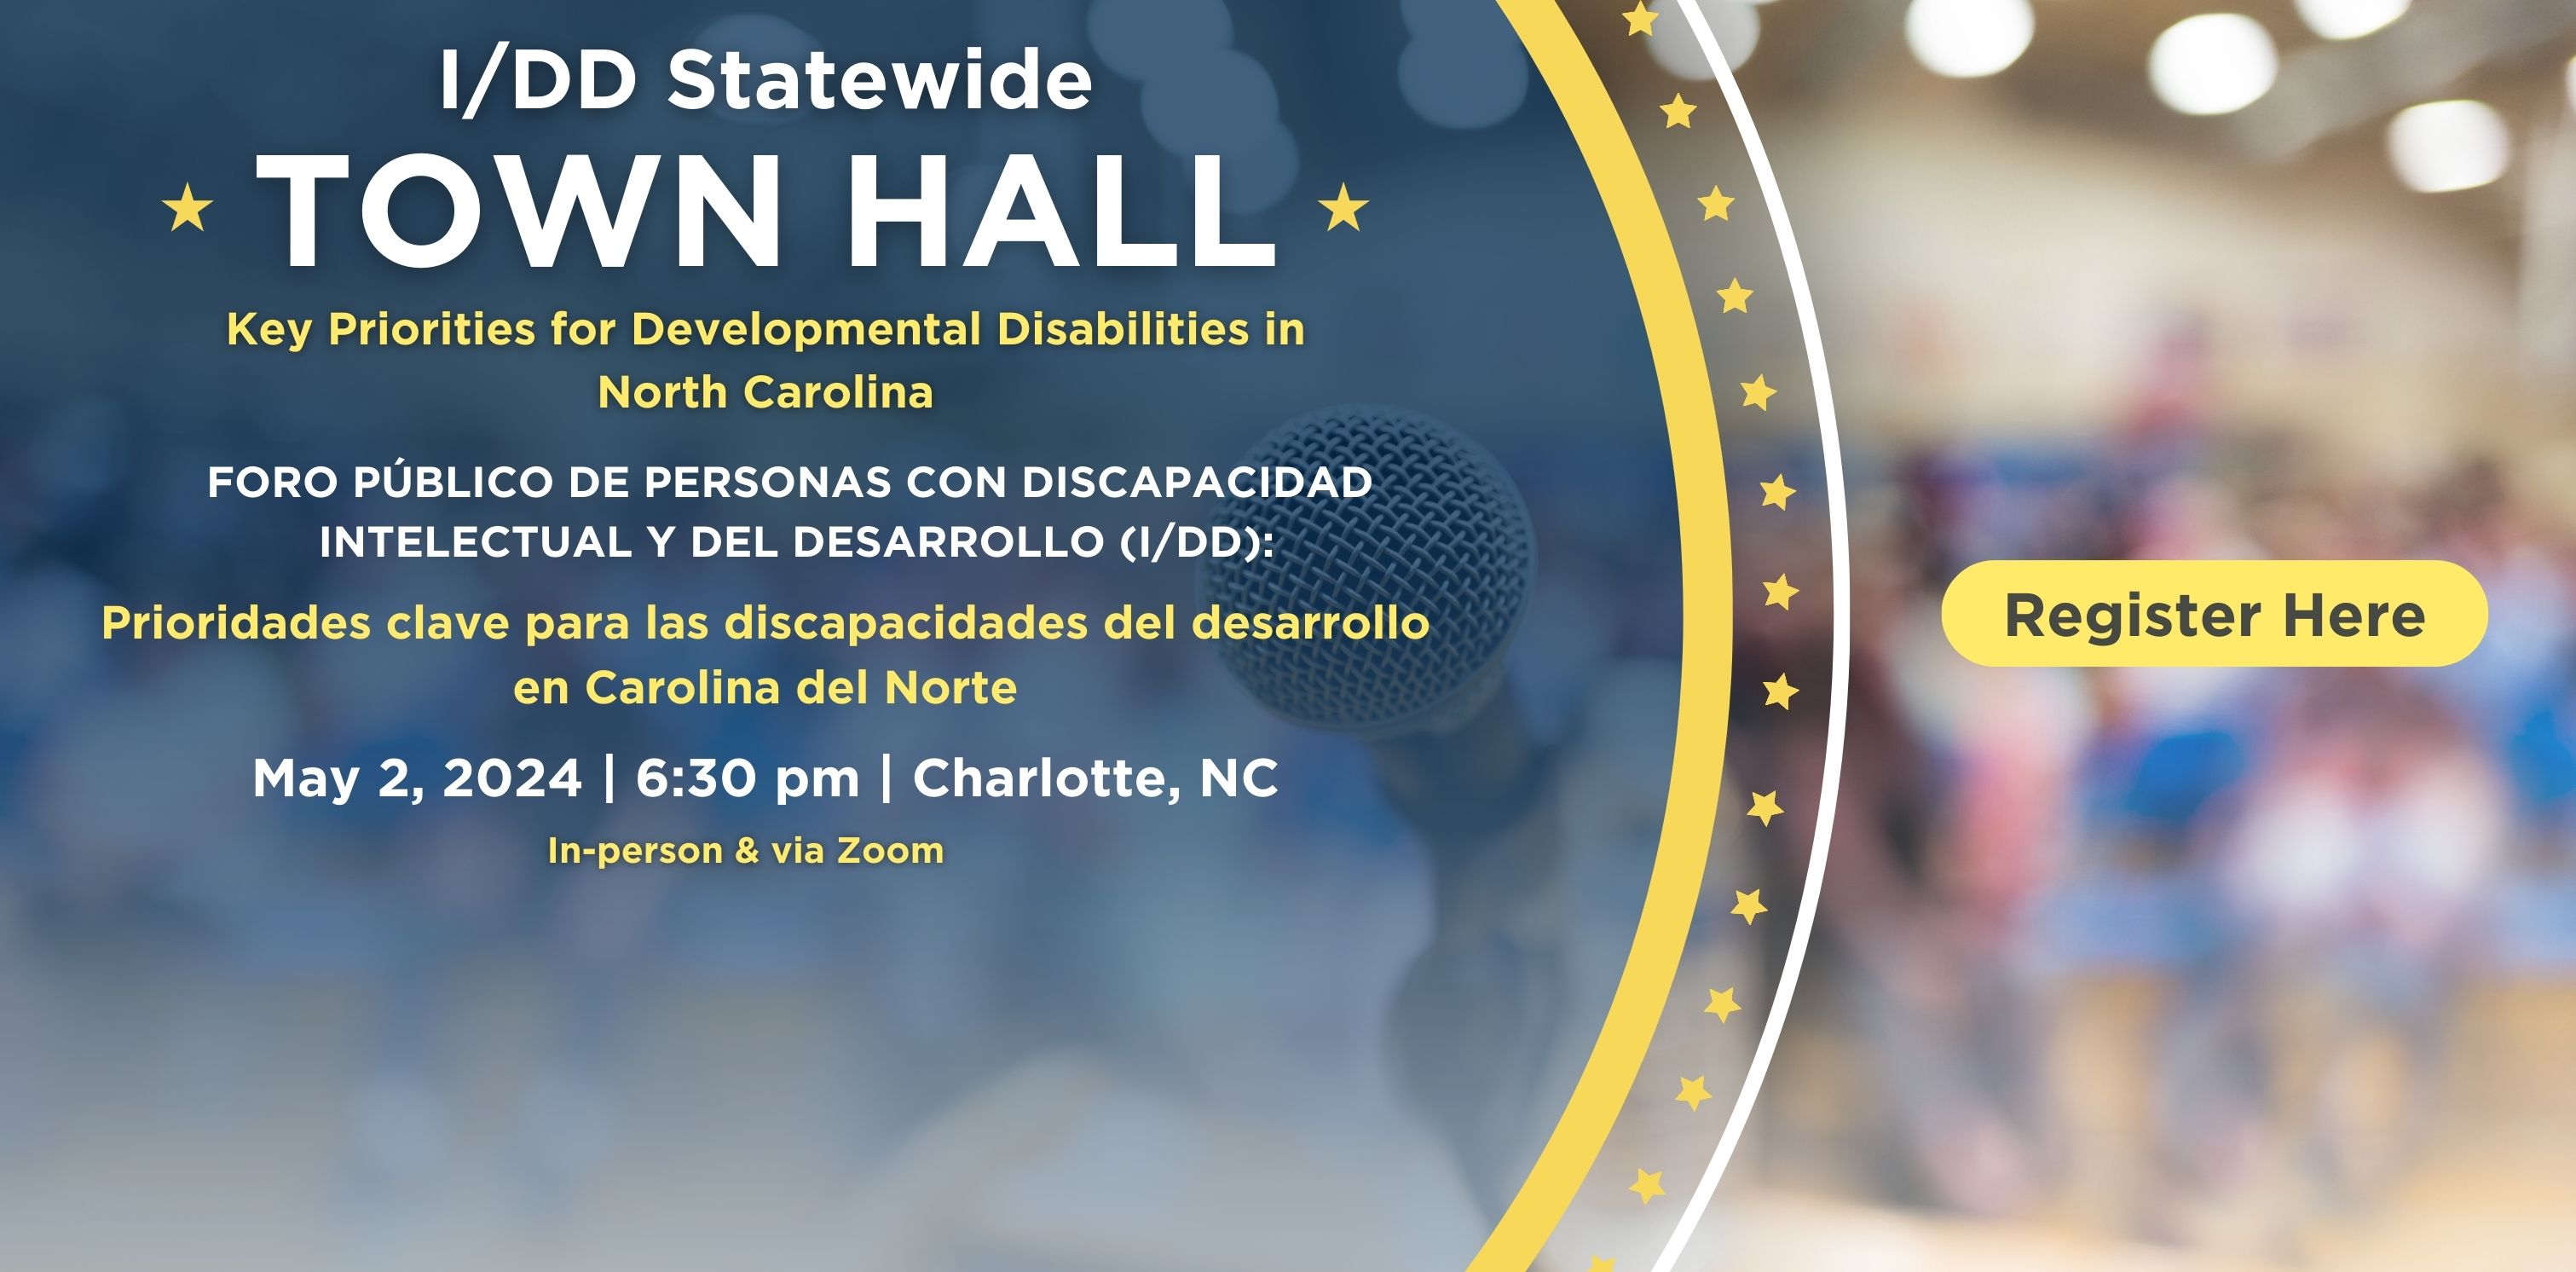 Join the I/DD Statewide Hybrid Townhall to hear updates on the state I/DD budget, 1915i Medicaid, Medicaid Expansion, and more.  